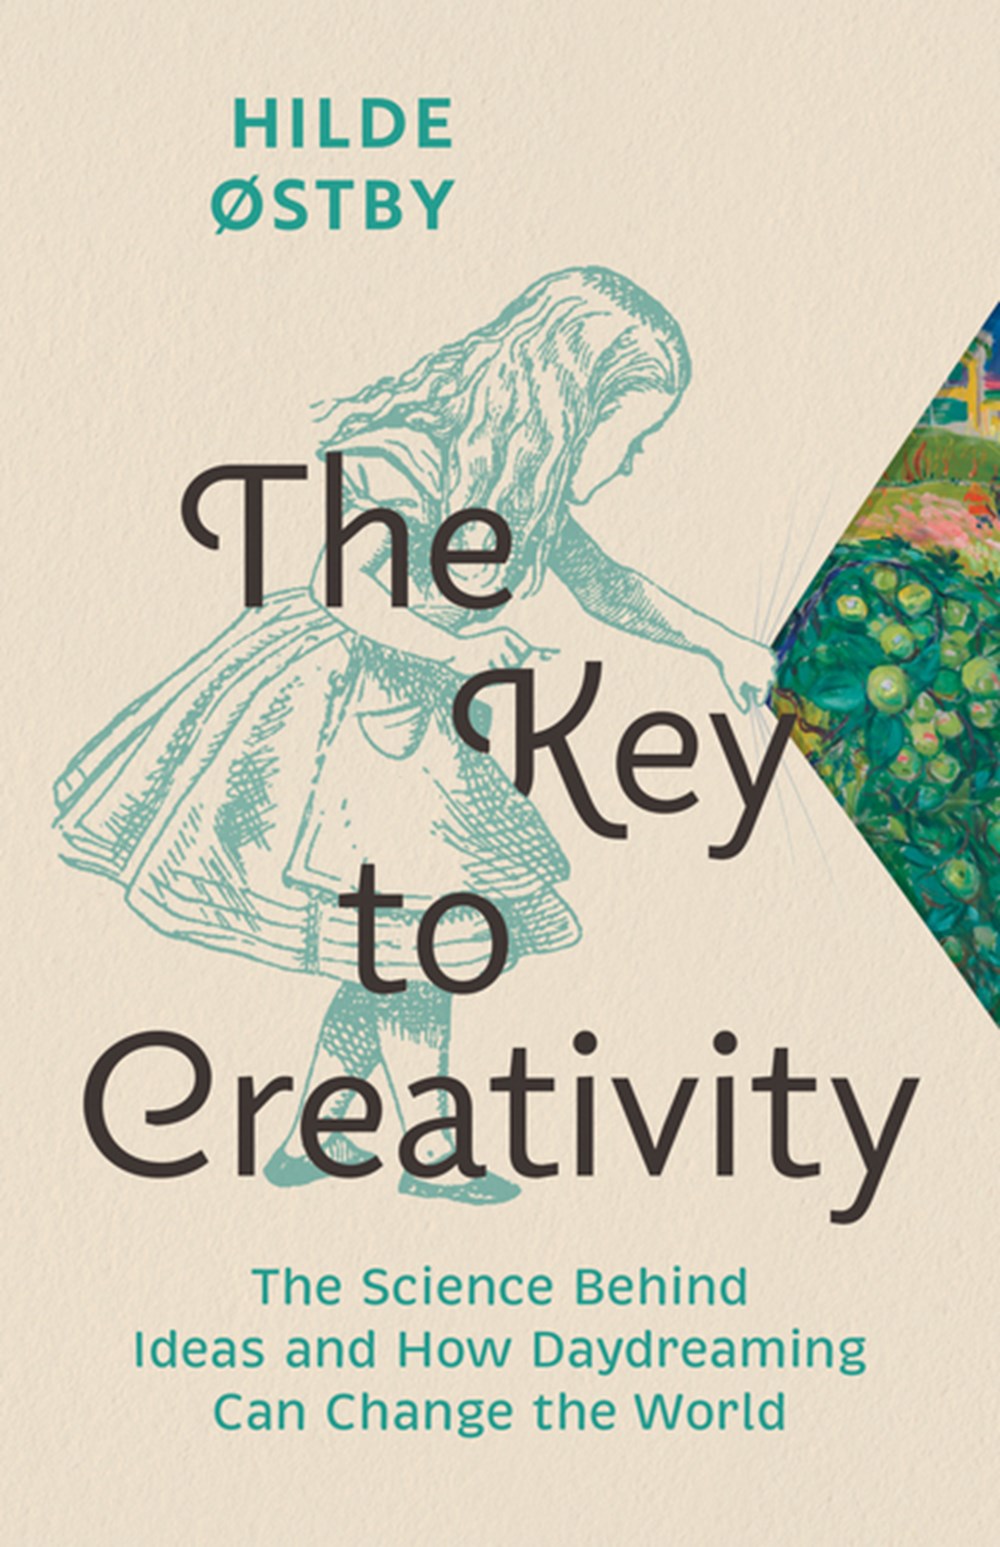 Key to Creativity: The Science Behind Ideas and How Daydreaming Can Change the World